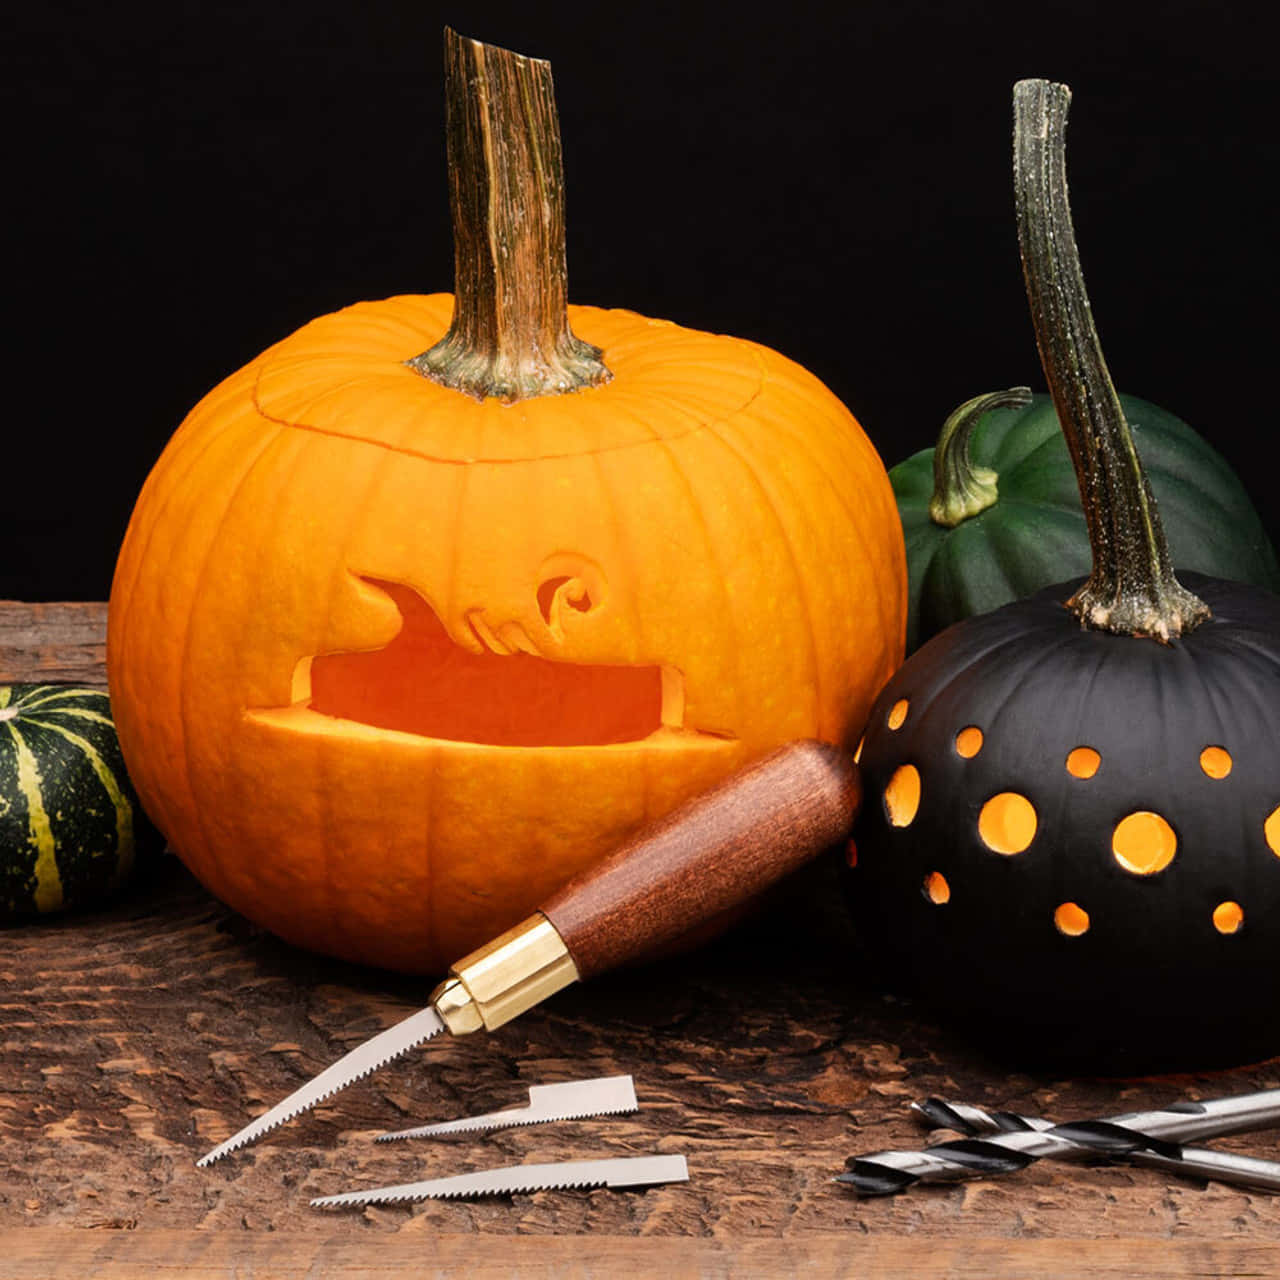 A Group Of Pumpkins With Carving Tools On A Table